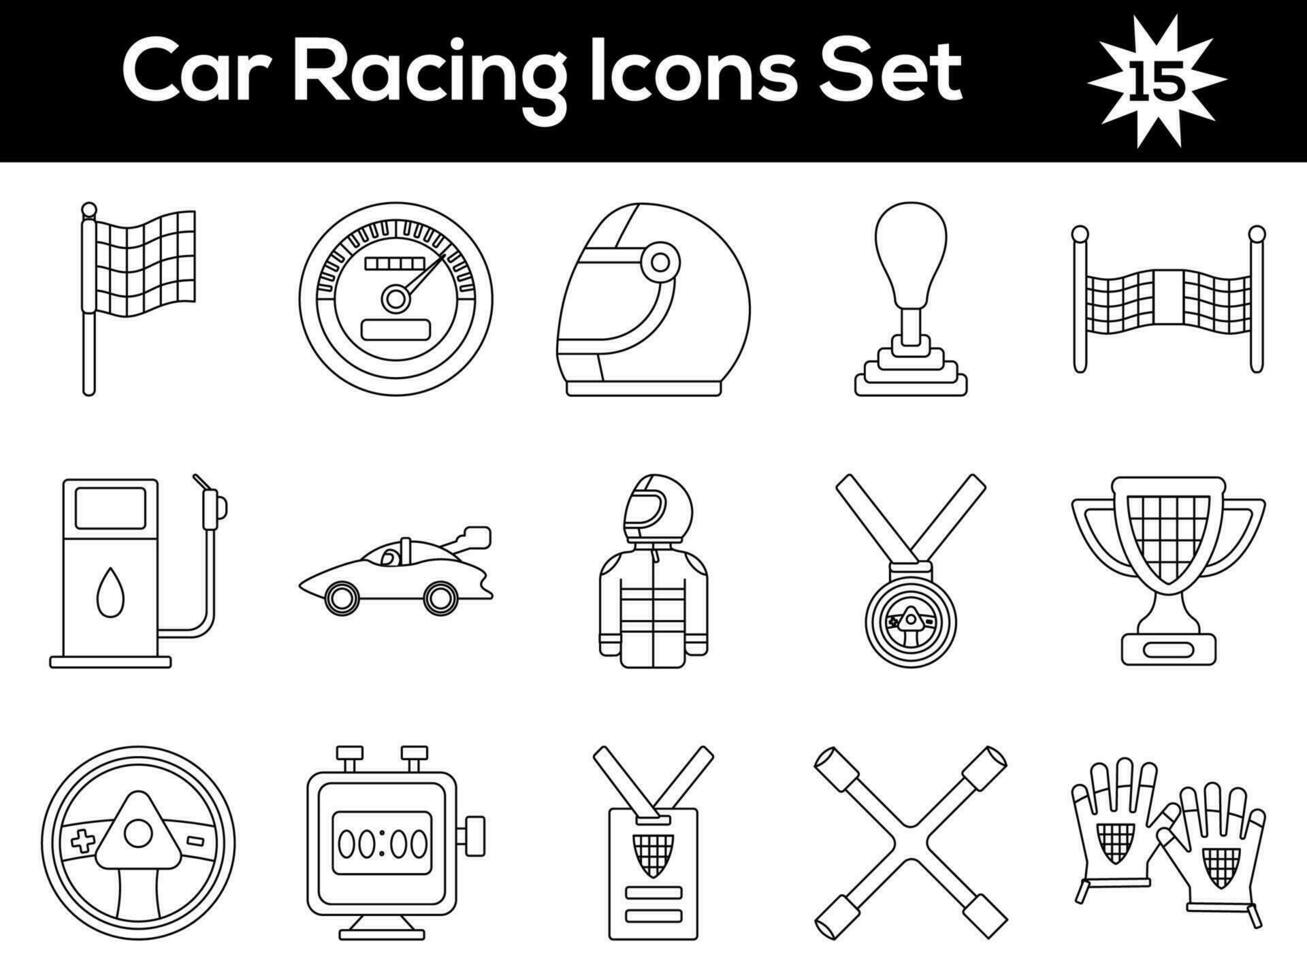 Illustration Of Car Racing Icons Set In Stroke Style. vector